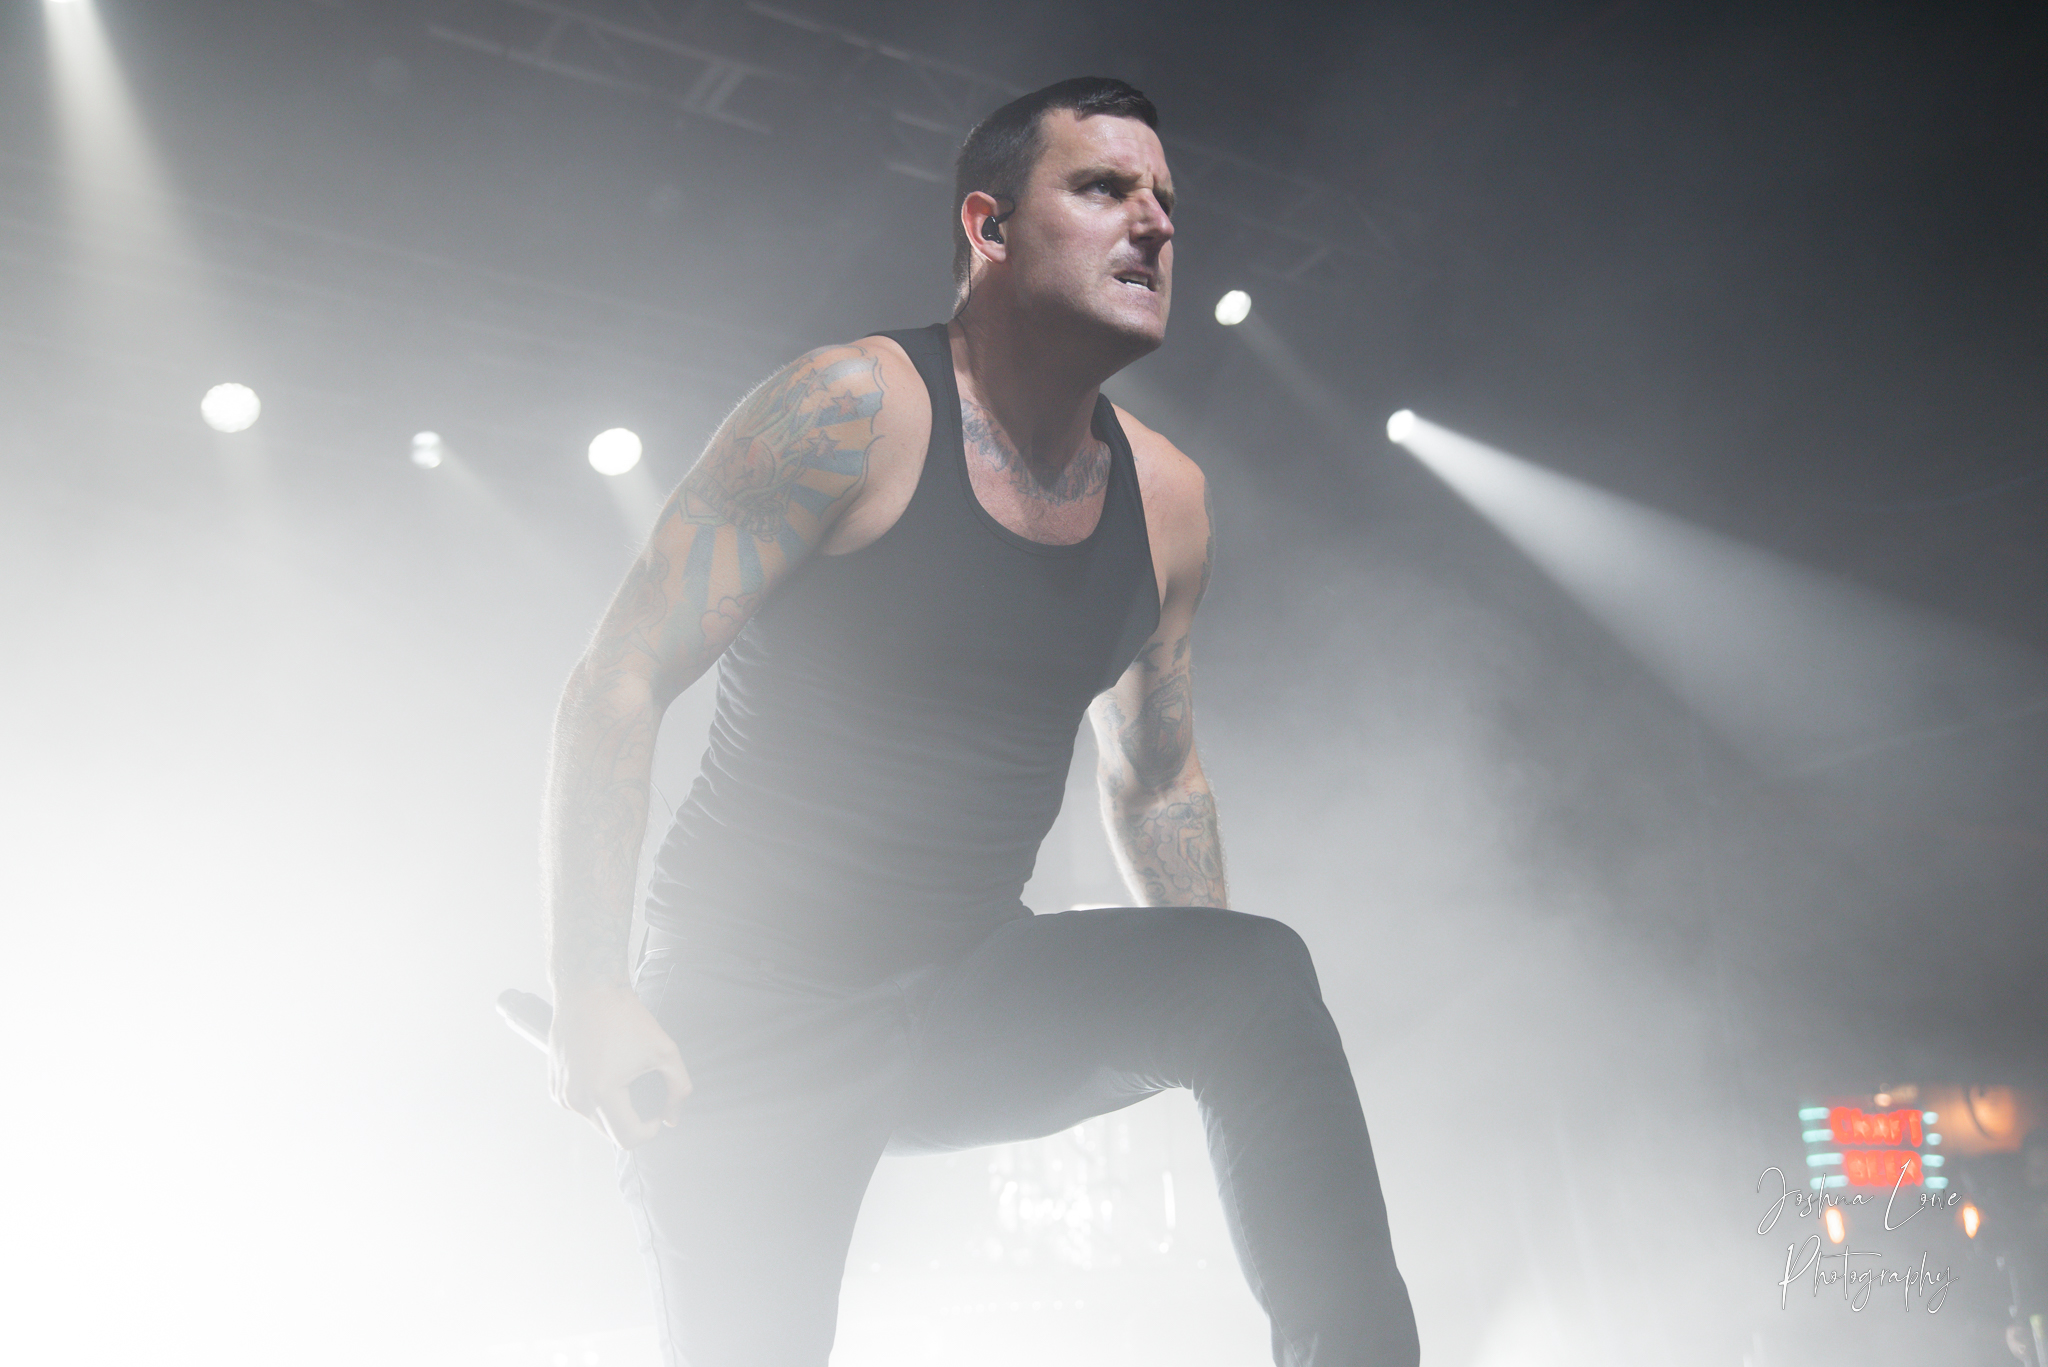 Parkway Drive release soundtrack for documentary film - - March 28